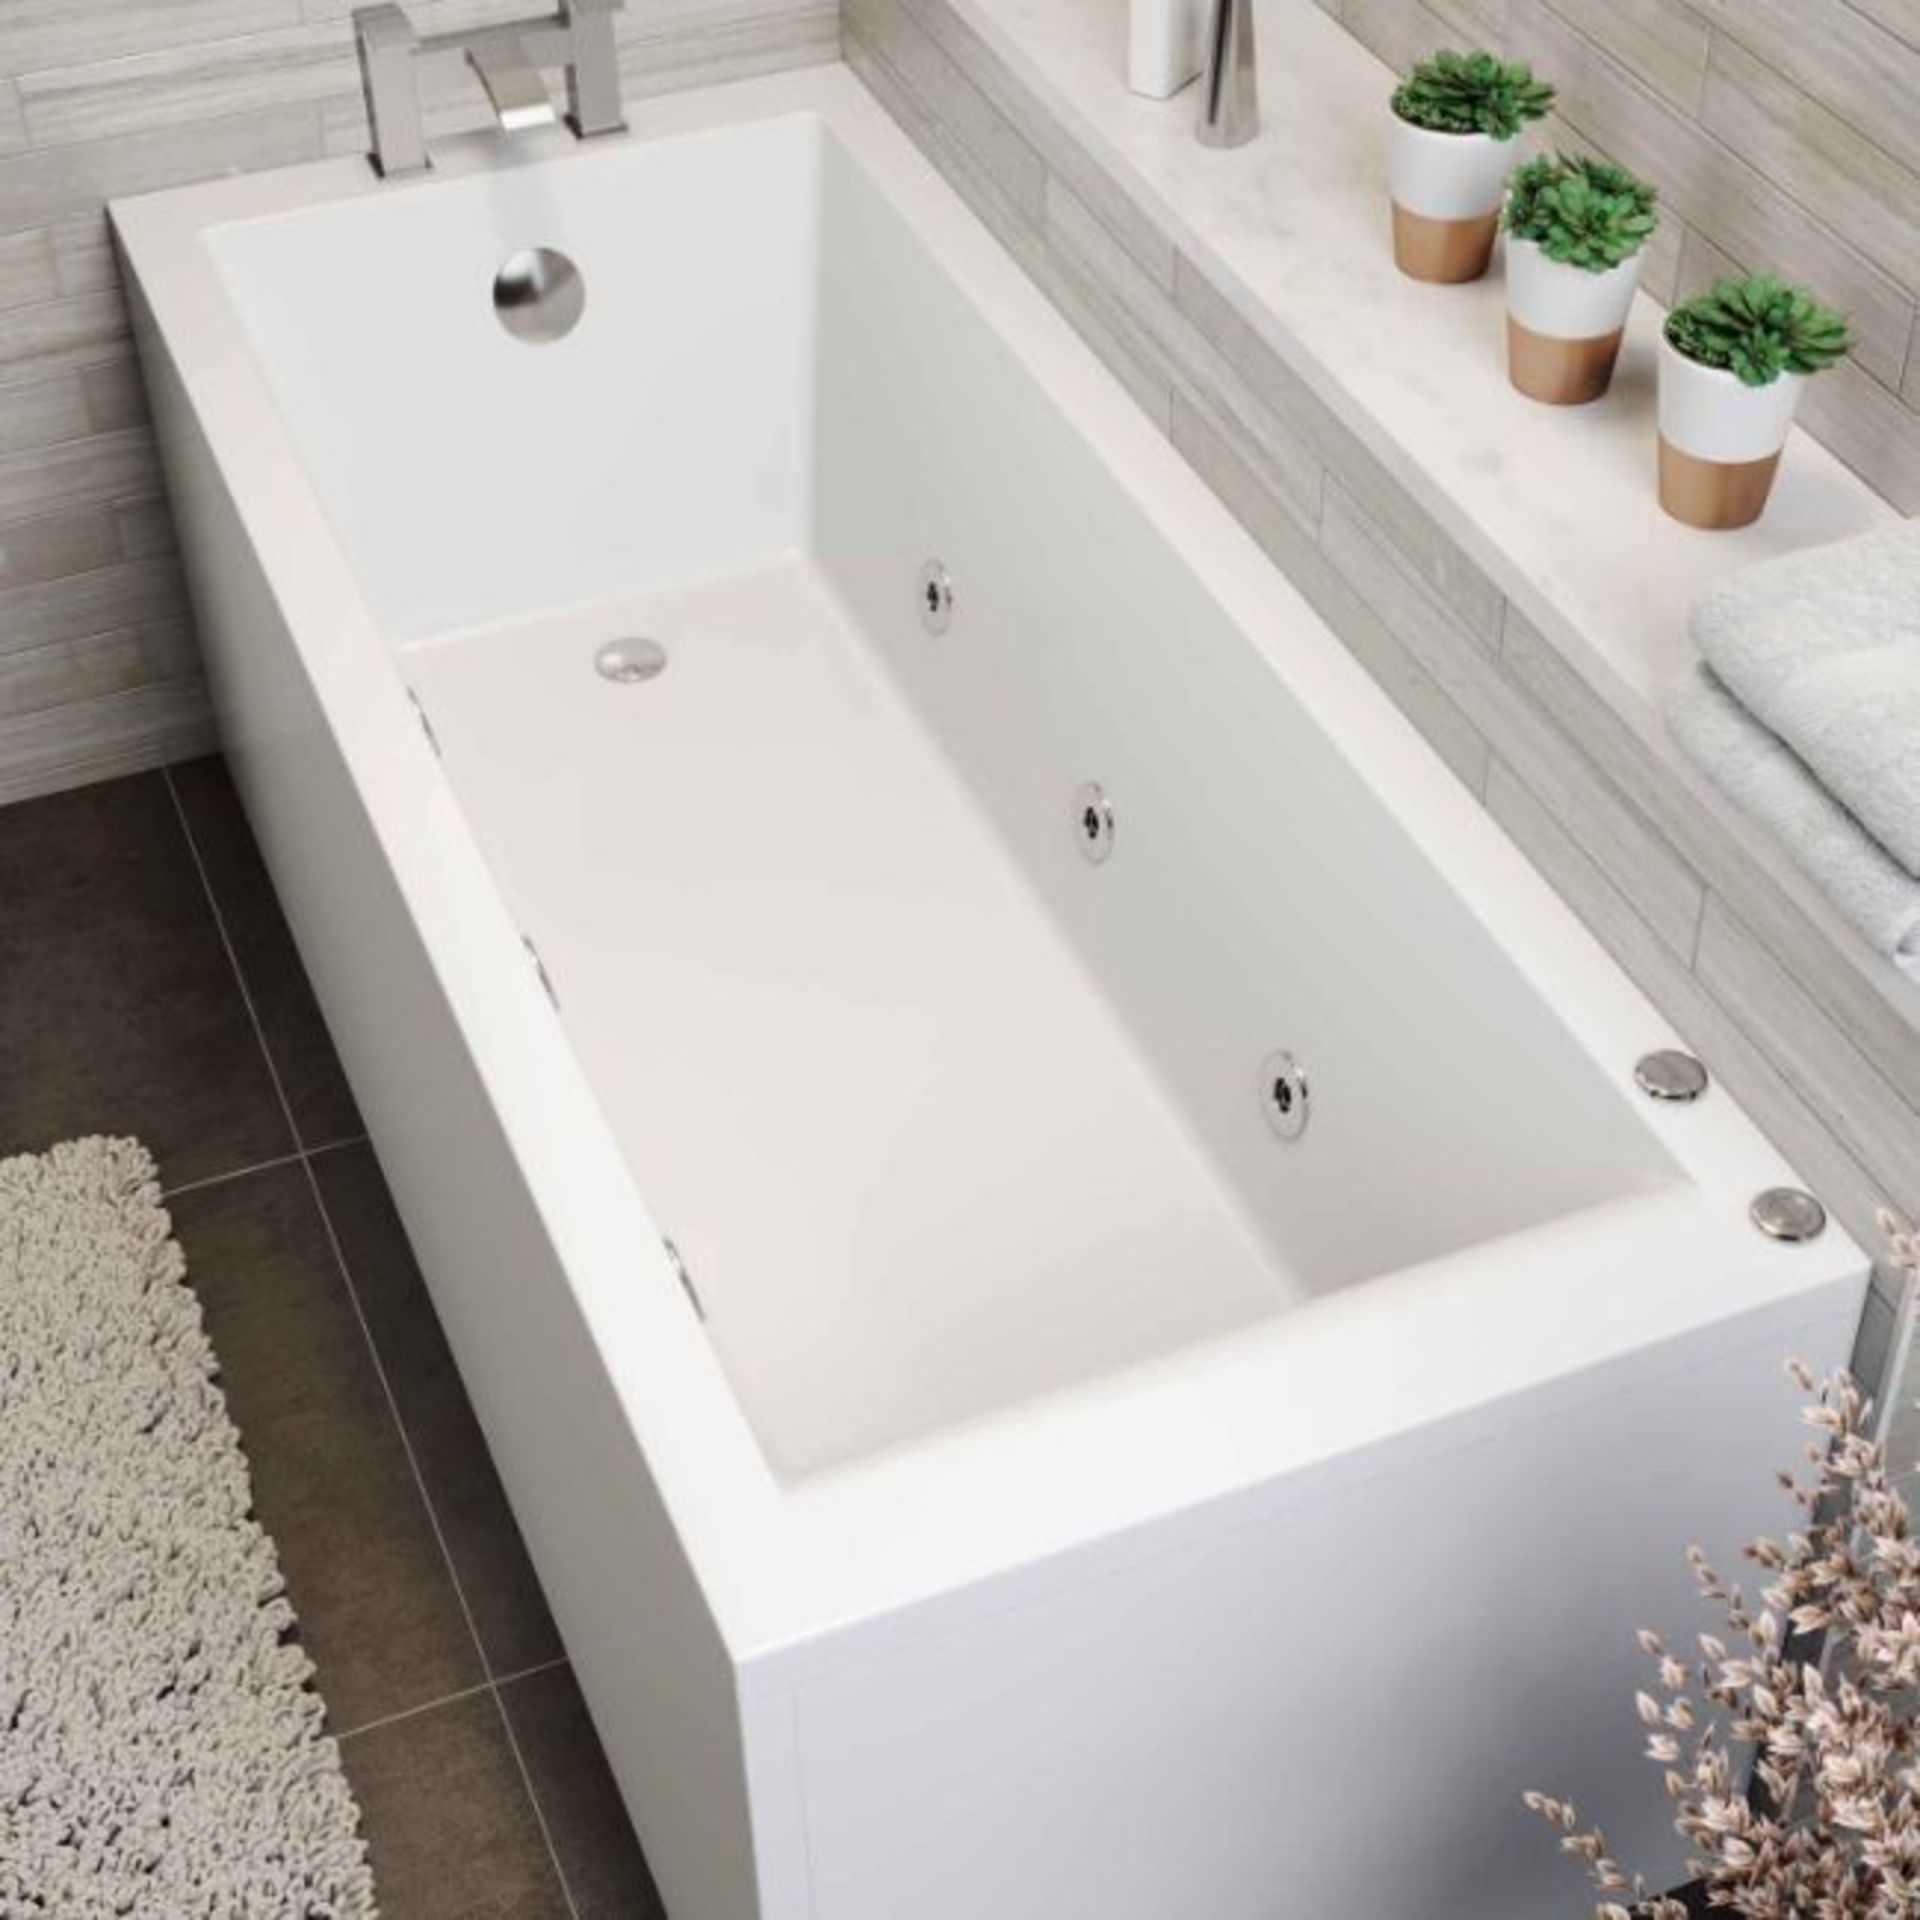 New 1700 x 700 x 545mm Whirlpool Jacuzzi Single-ended Bath - 6 Jets. RRP £1,299.99 - Image 2 of 3